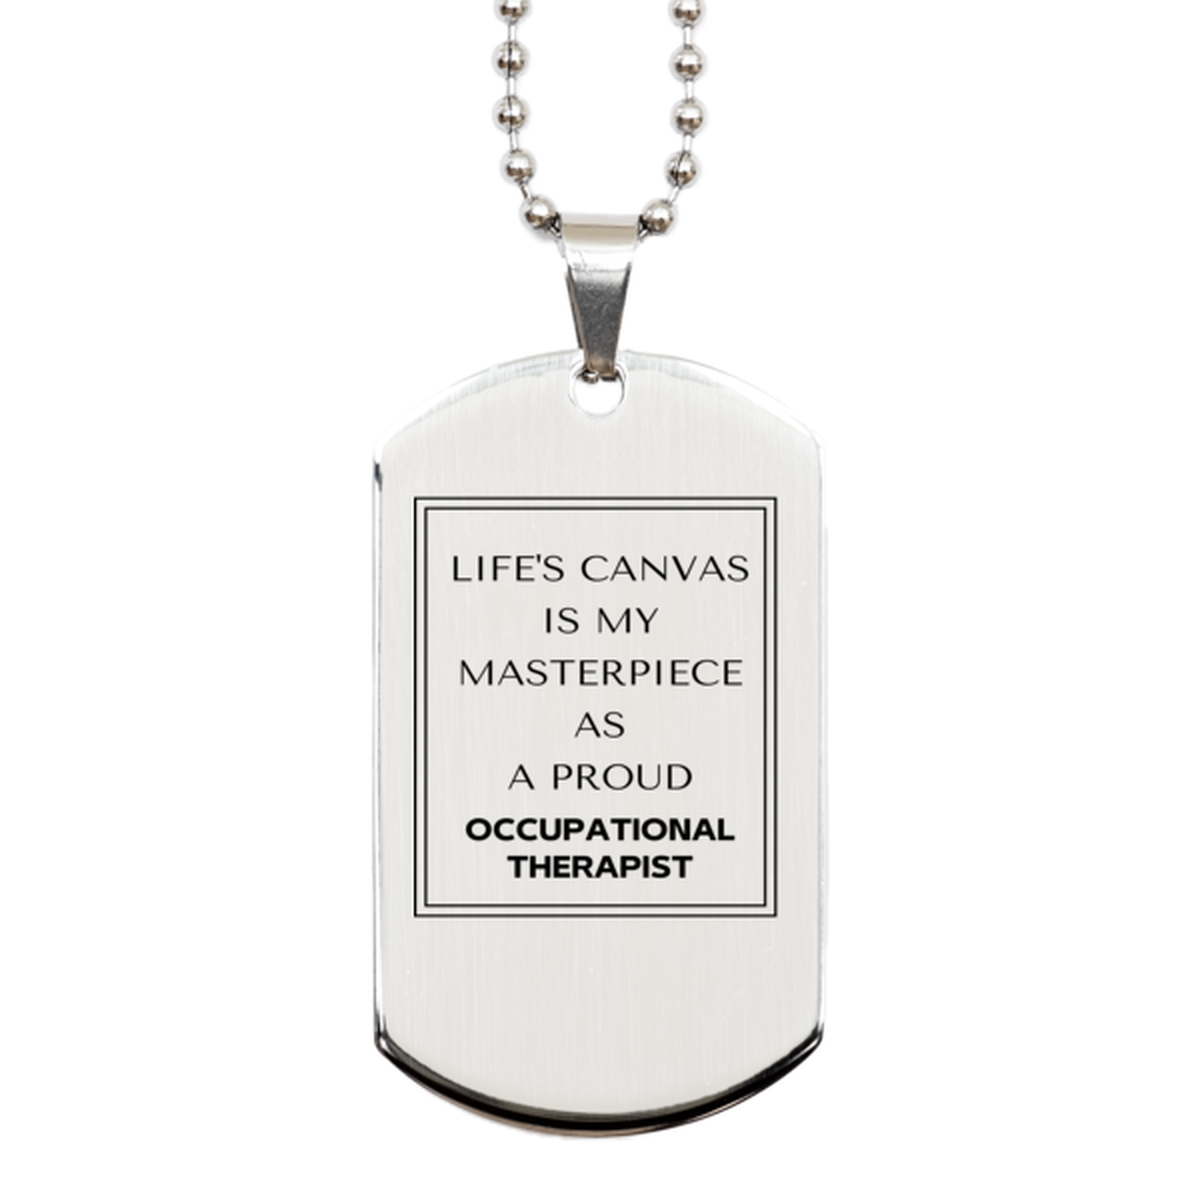 Proud Occupational Therapist Gifts, Life's canvas is my masterpiece, Epic Birthday Christmas Unique Silver Dog Tag For Occupational Therapist, Coworkers, Men, Women, Friends